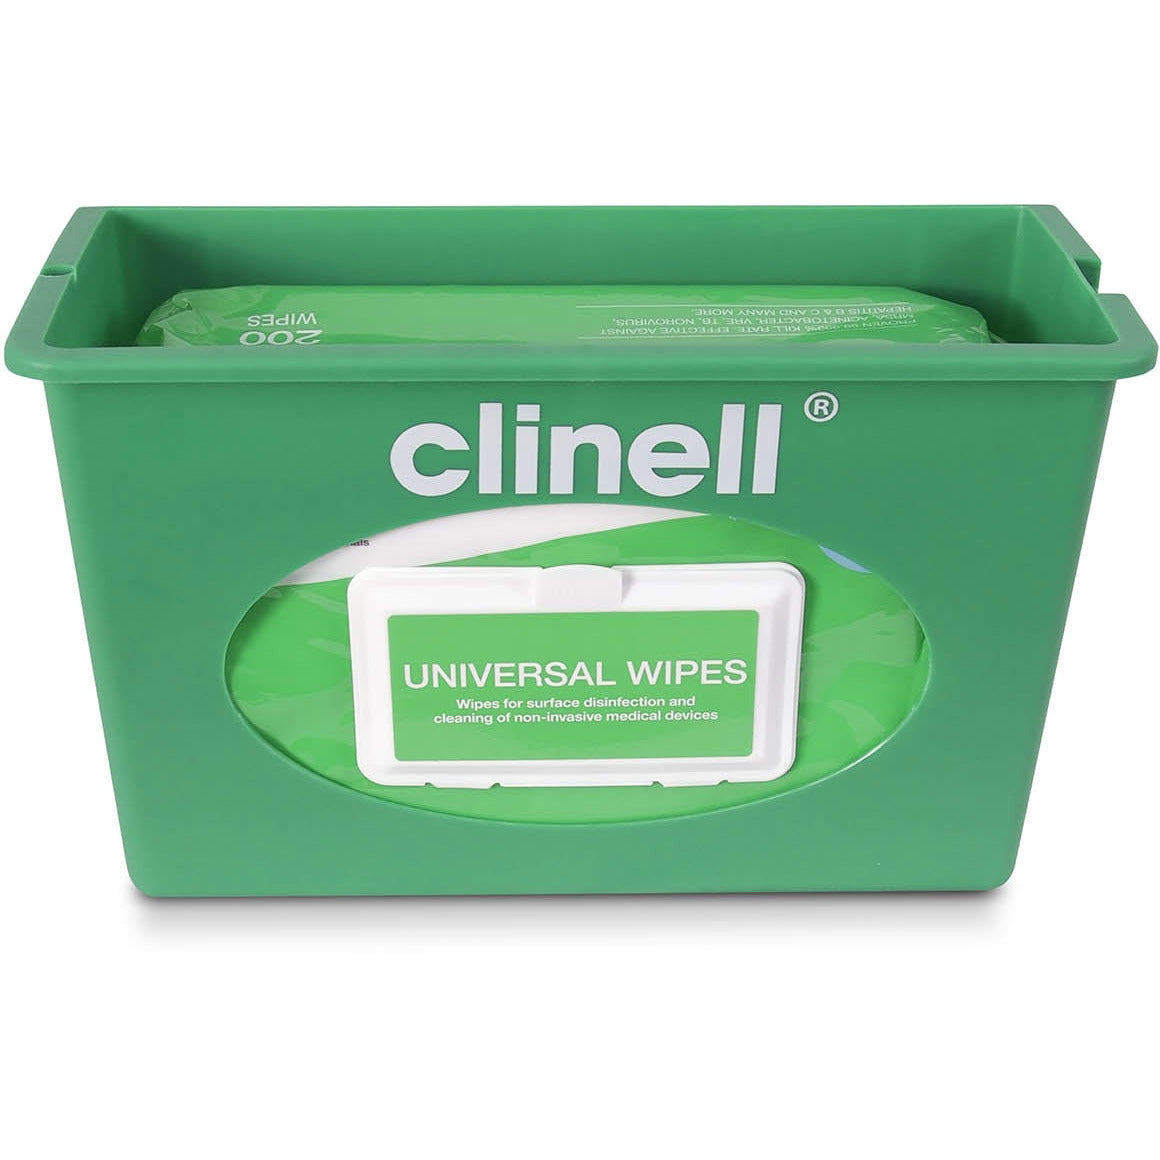 Clinell Universal Wipes Wall Mounted Dispenser Lid - Green